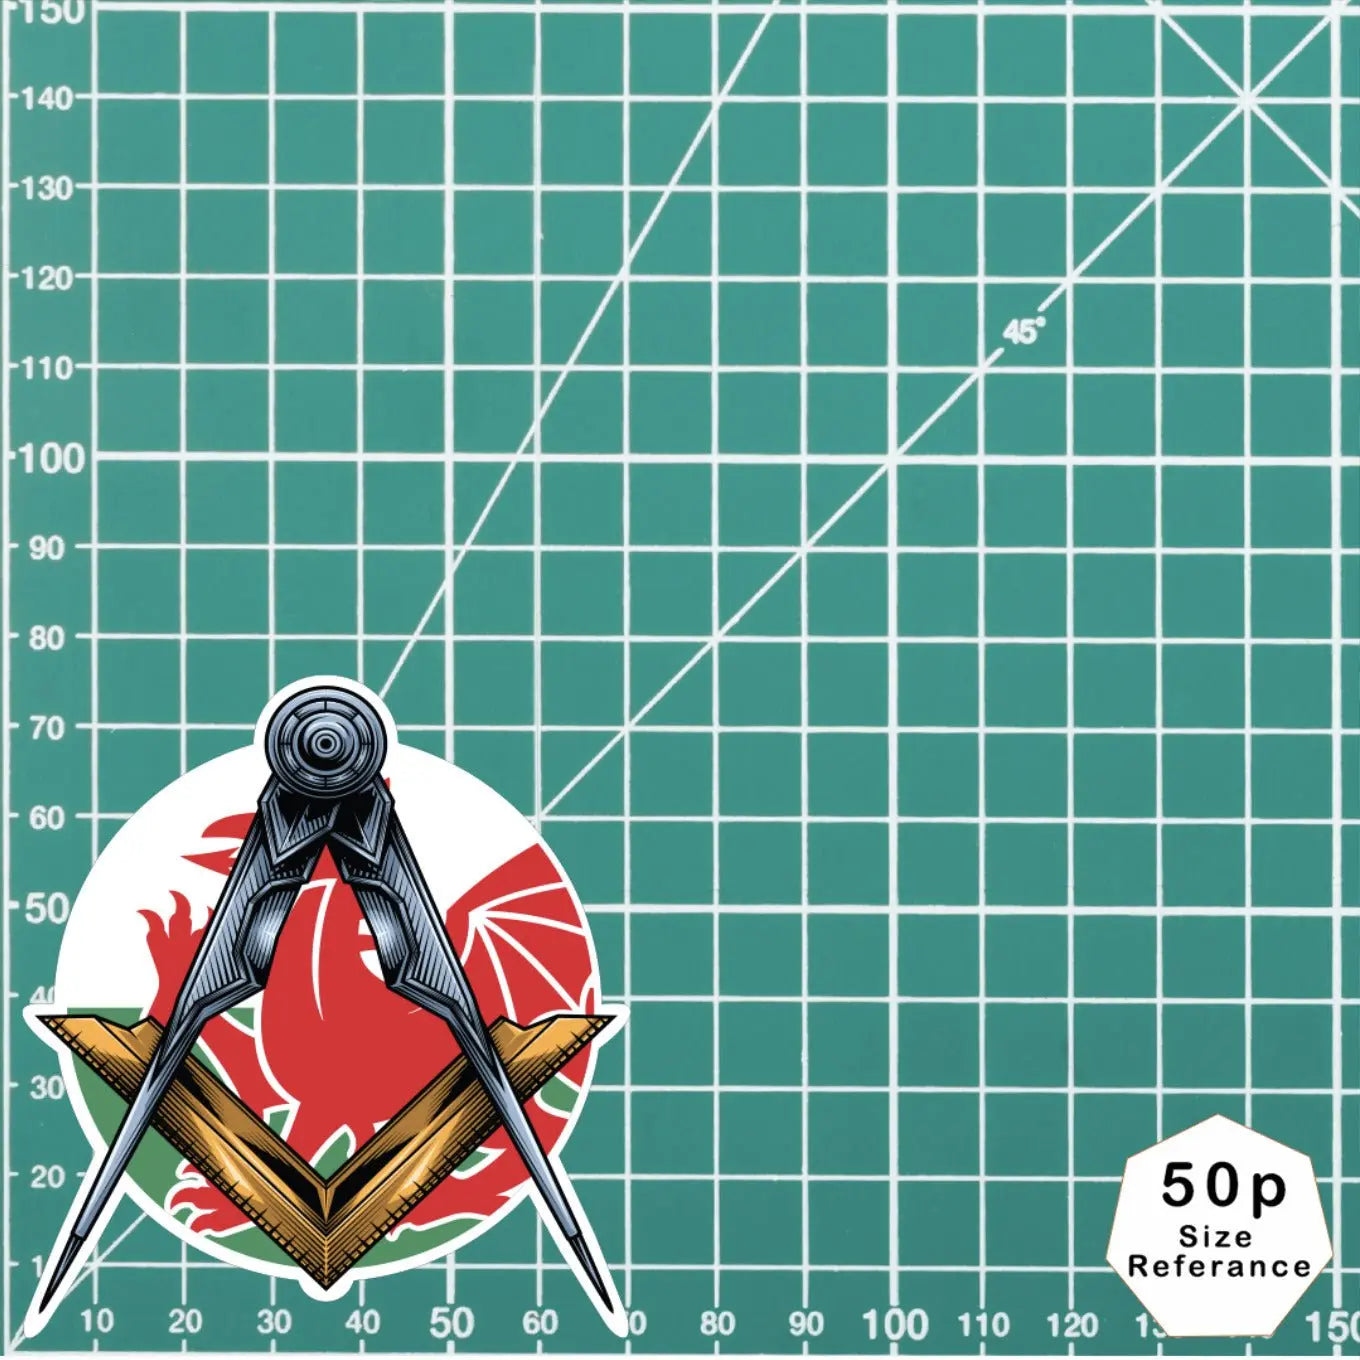 Masonic Square and Compass Welsh Flag Vinyl Sticker Decal | Waterproof redplume